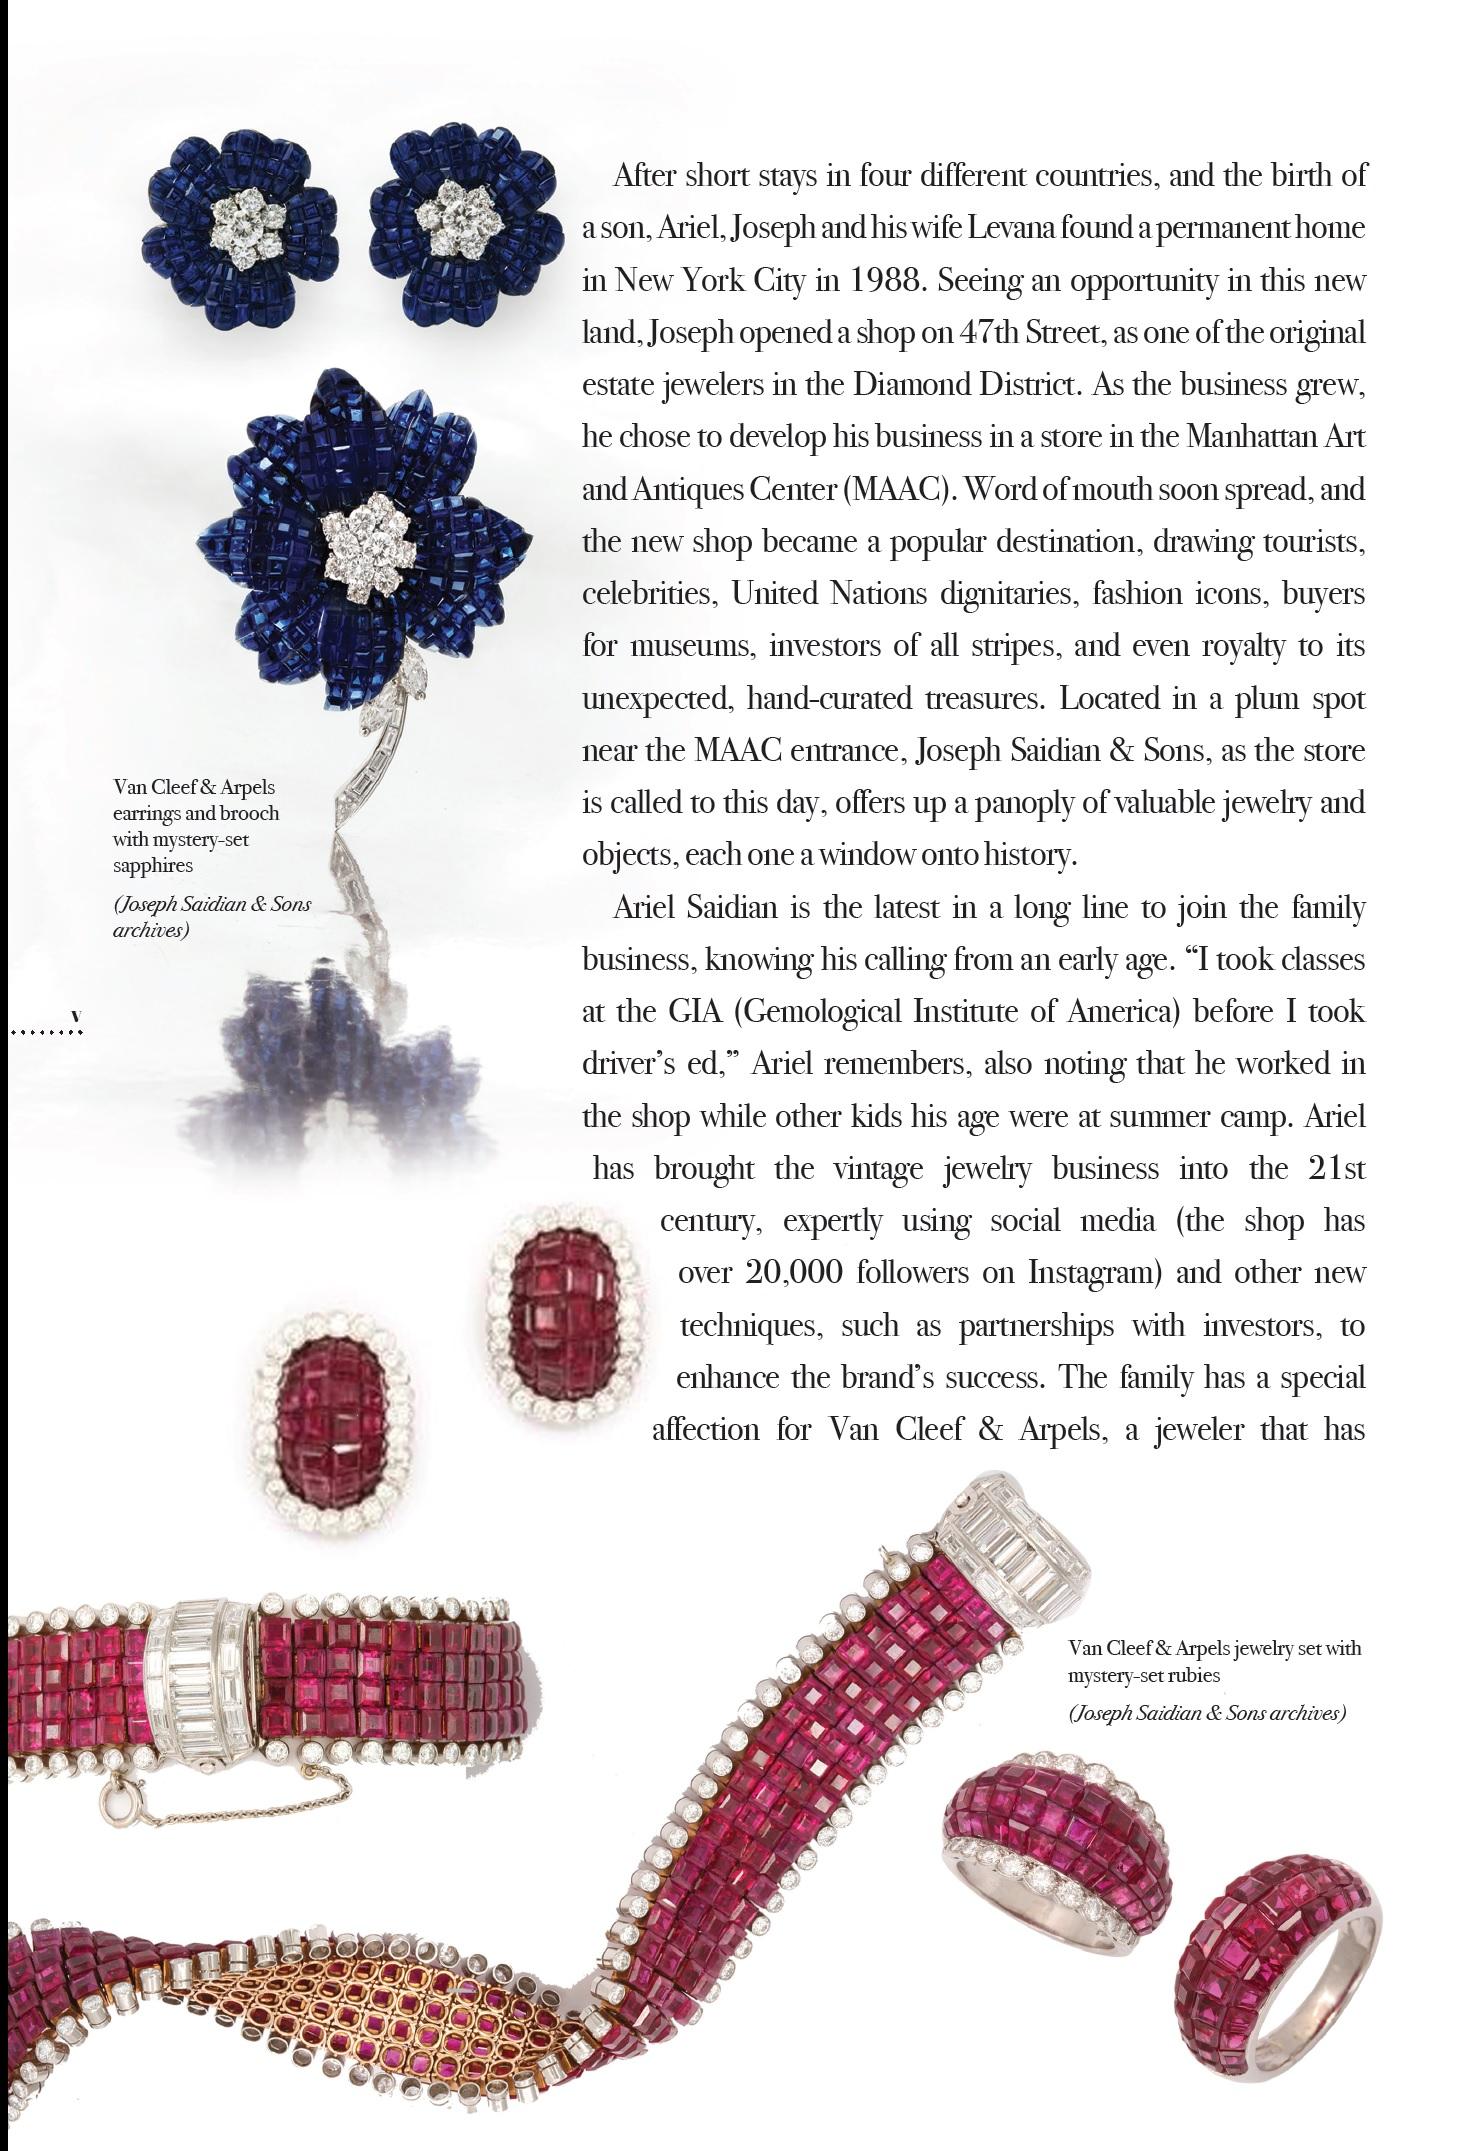 “The History of Jewelry: Joseph Saidian and Sons”  A beautiful coffee table book published by Rizzoli   

This book is over 170 years in the making chronicling some of the greatest jewels and gems of all time handles over the past four generations